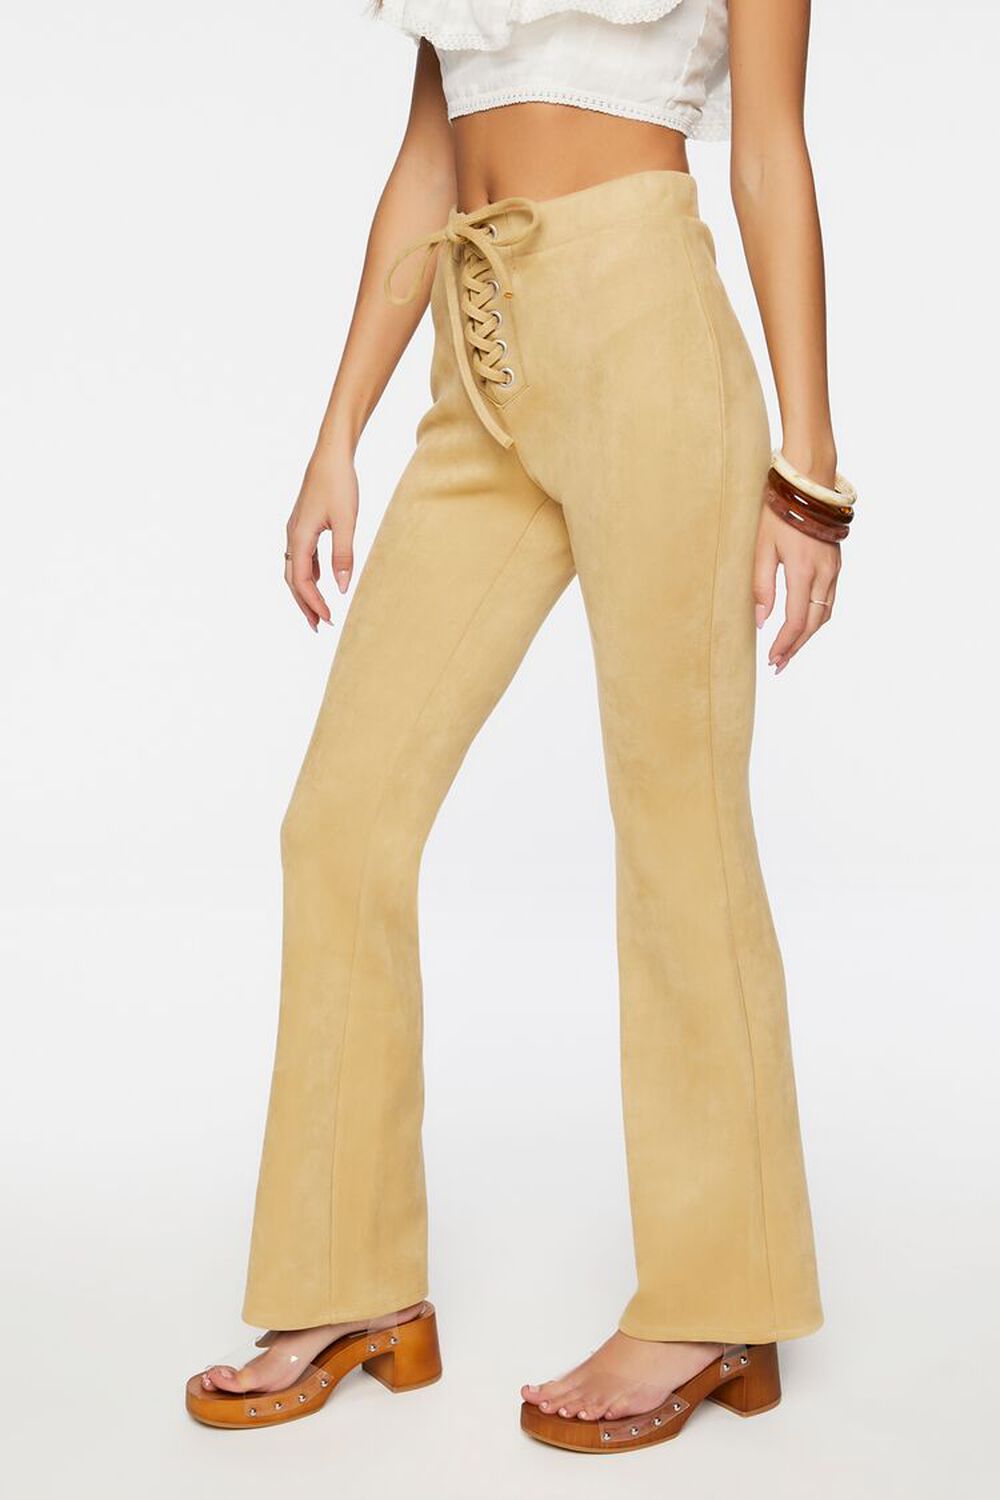 CAPPUCCINO Faux Suede Lace-Up Flare Pants, image 3